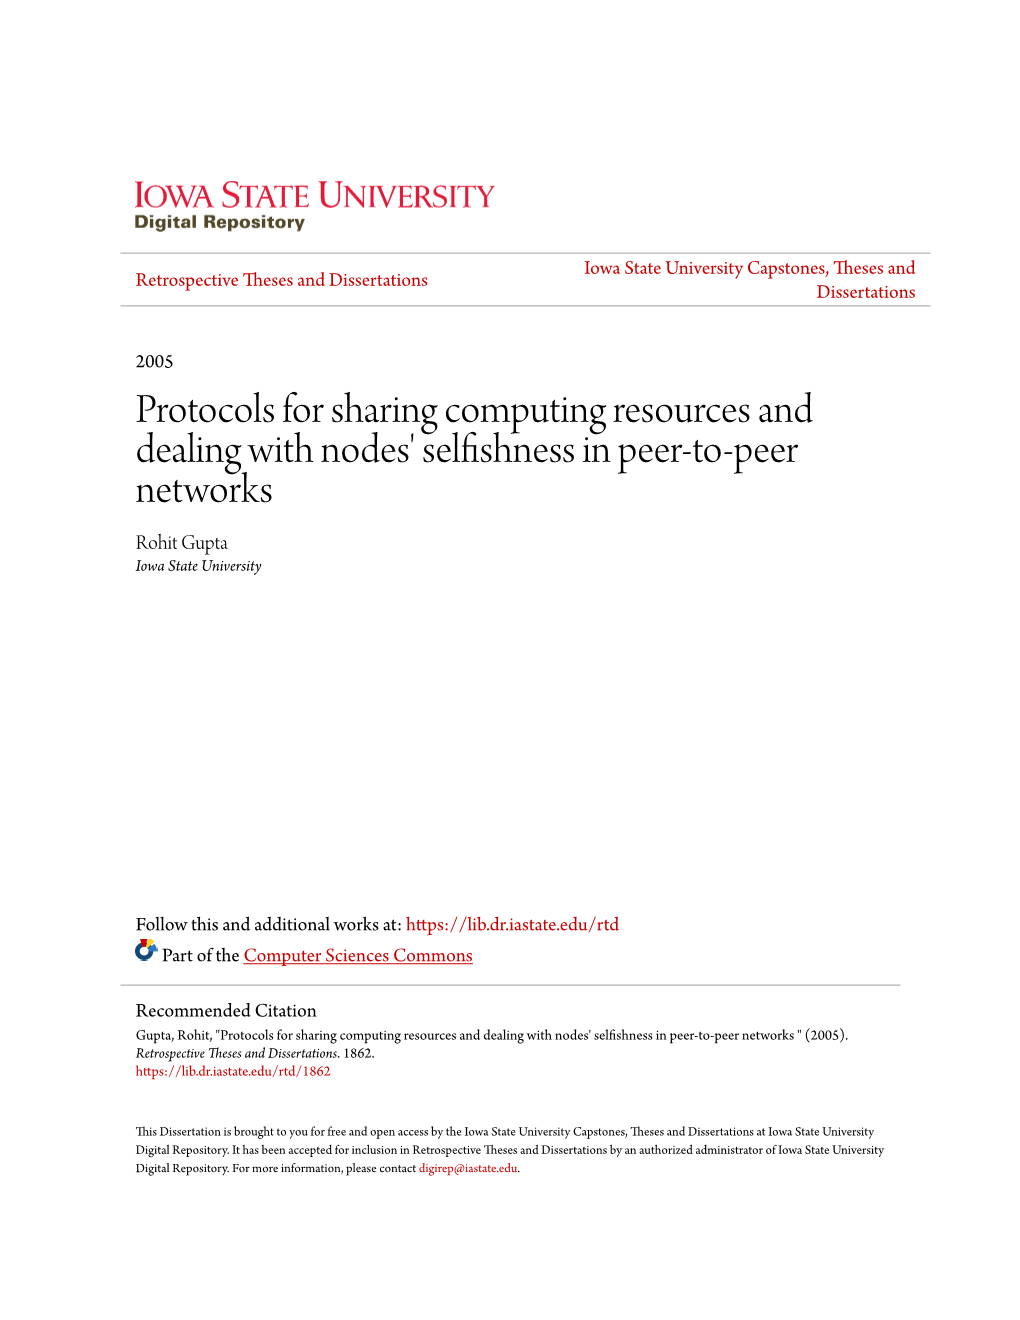 Protocols for Sharing Computing Resources and Dealing with Nodes' Selfishness in Peer-To-Peer Networks Rohit Gupta Iowa State University